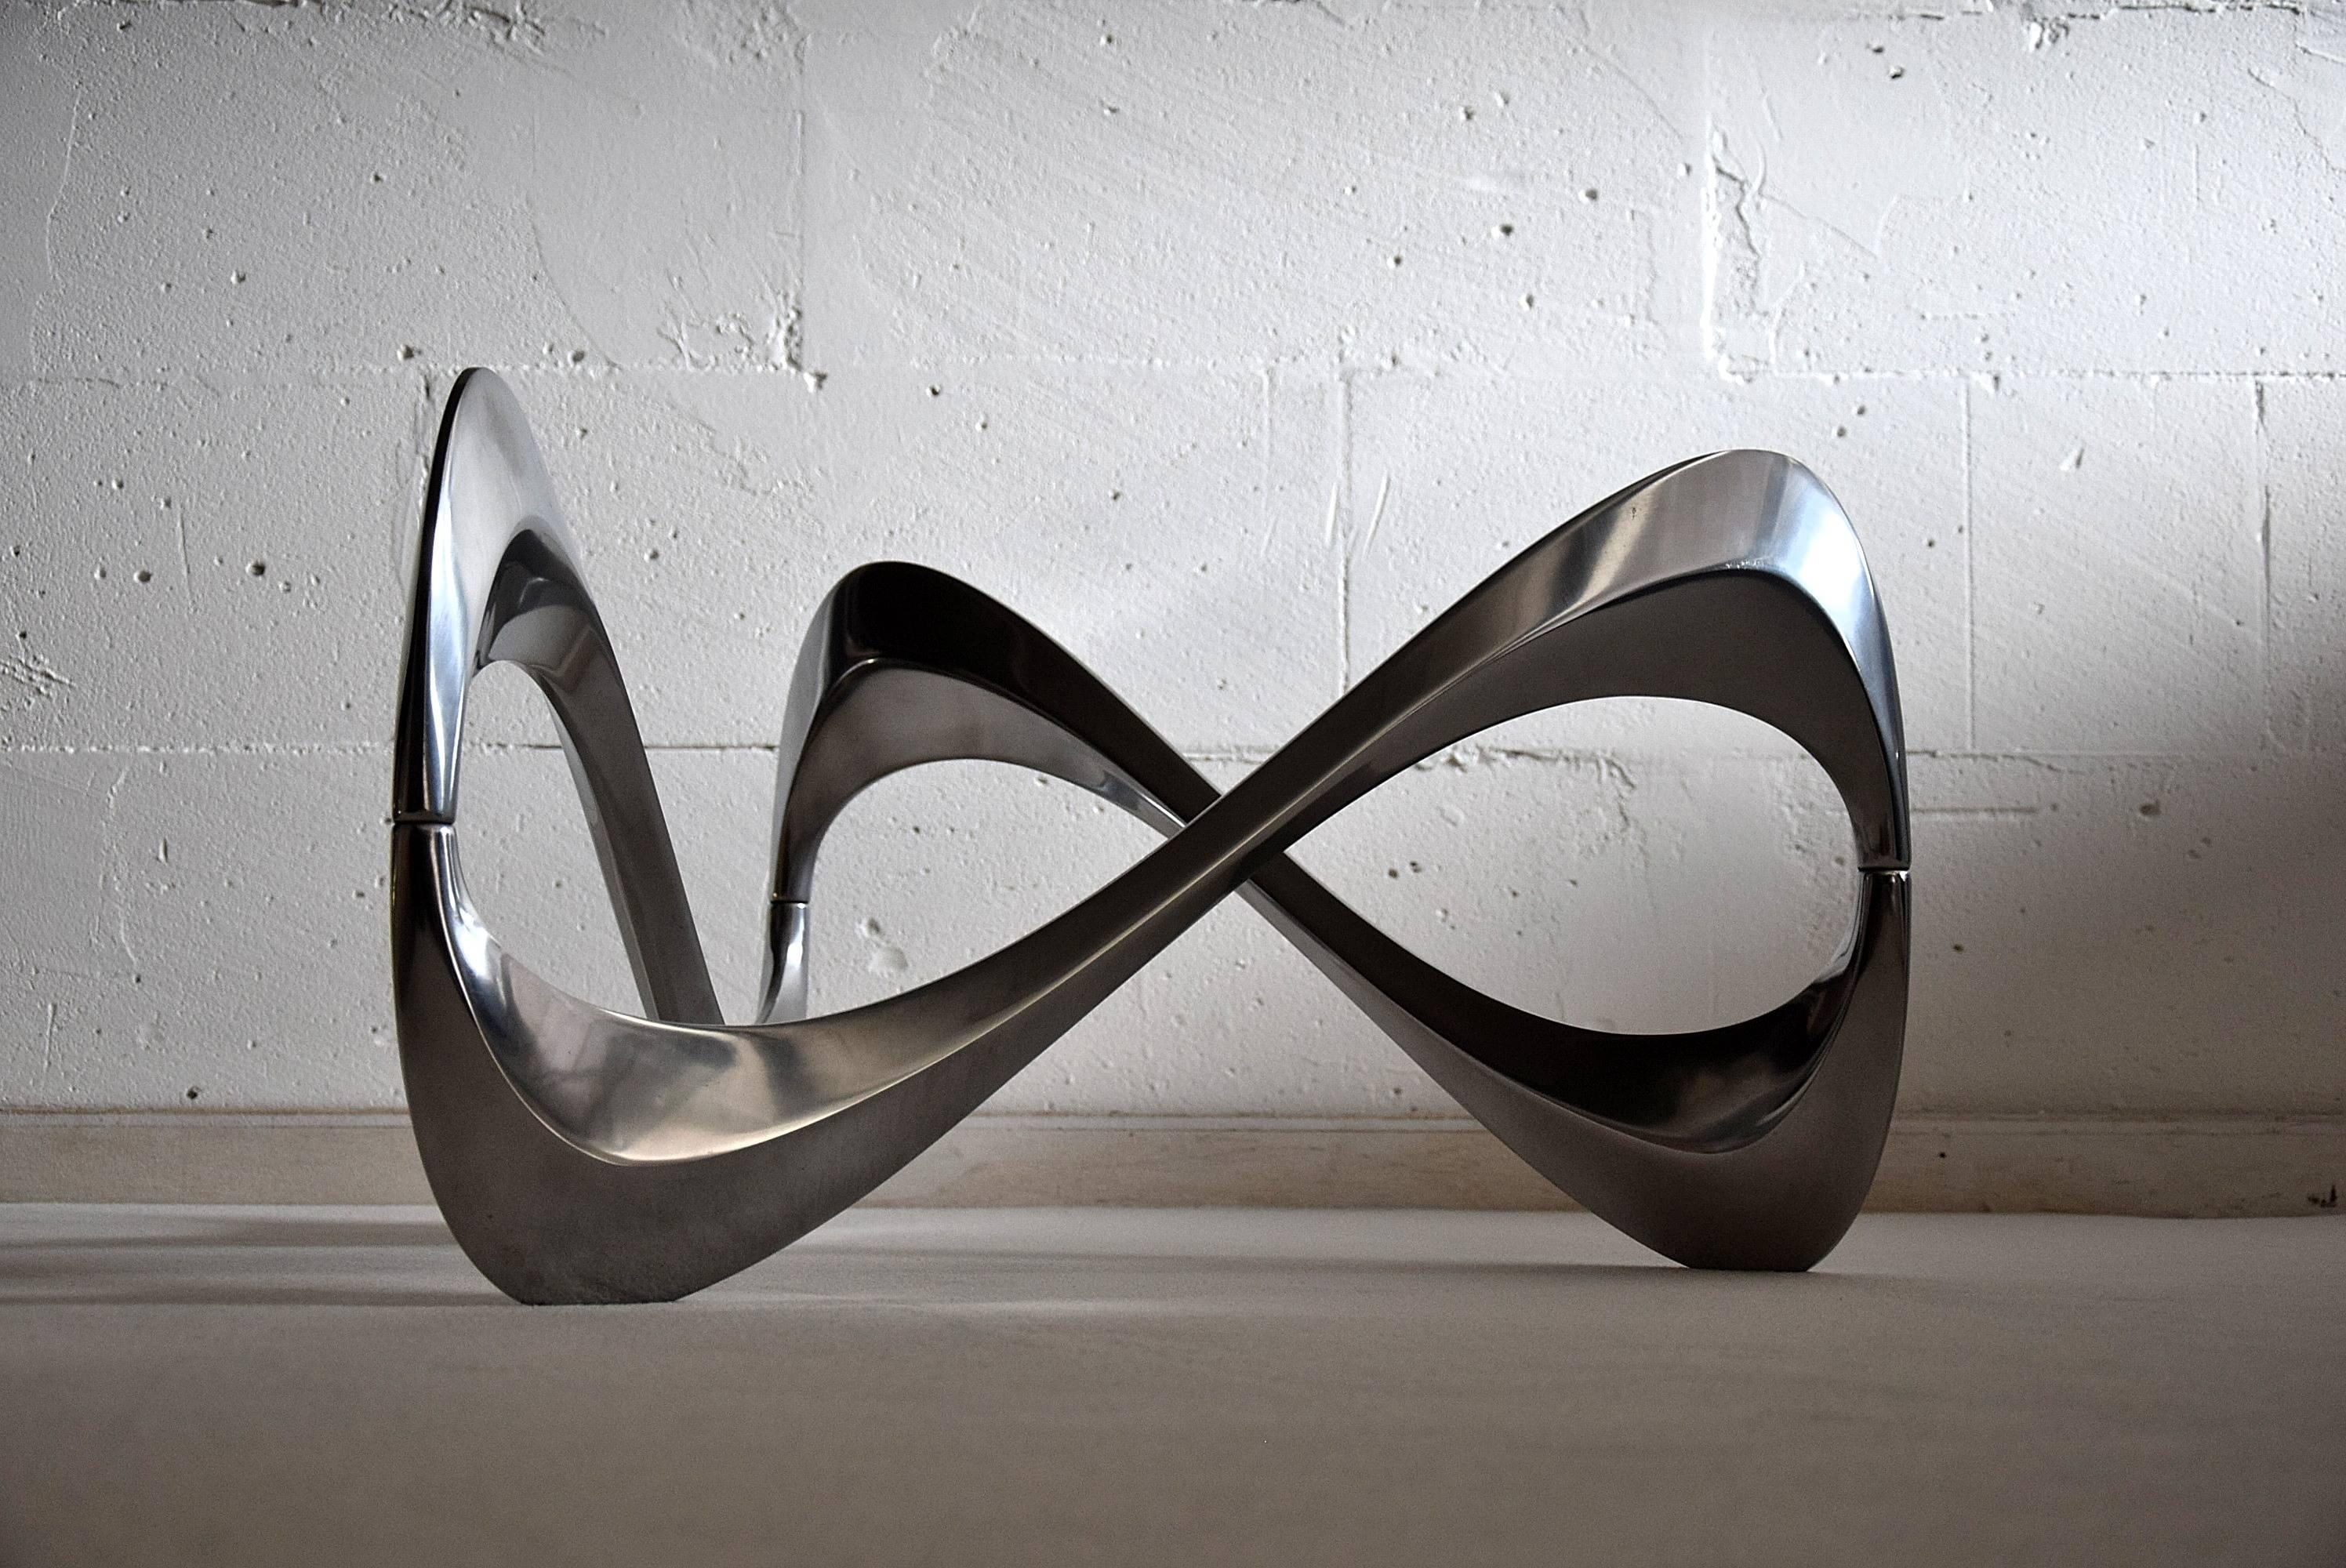 Mid century modern Snake table by Knut Hesterberg for Ronald Schmitt, 1965

This conversation piece is made of an organic shaped aluminium base which measures D 67 x W 67 x H 37.5cm and a thick round fume glass top with a diameter of 120cm.

This